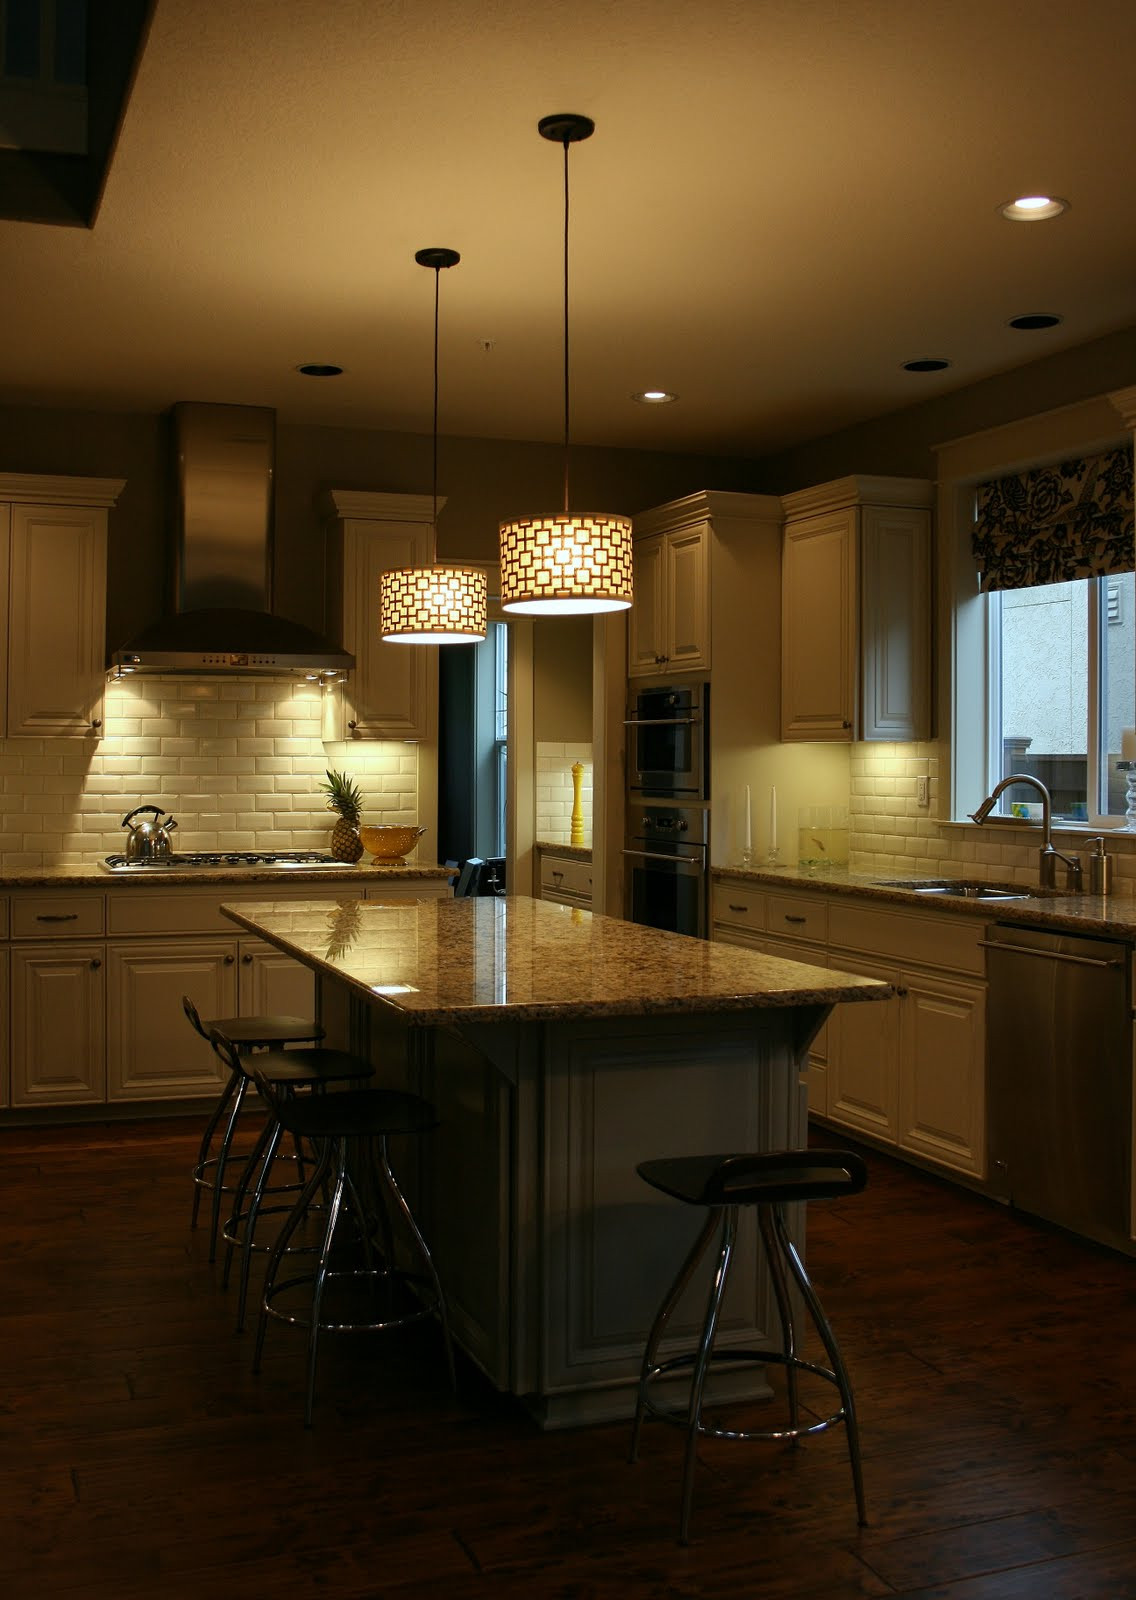 Hanging Light For Kitchen Islands
 Kitchen Island Lighting System with Pendant and Chandelier